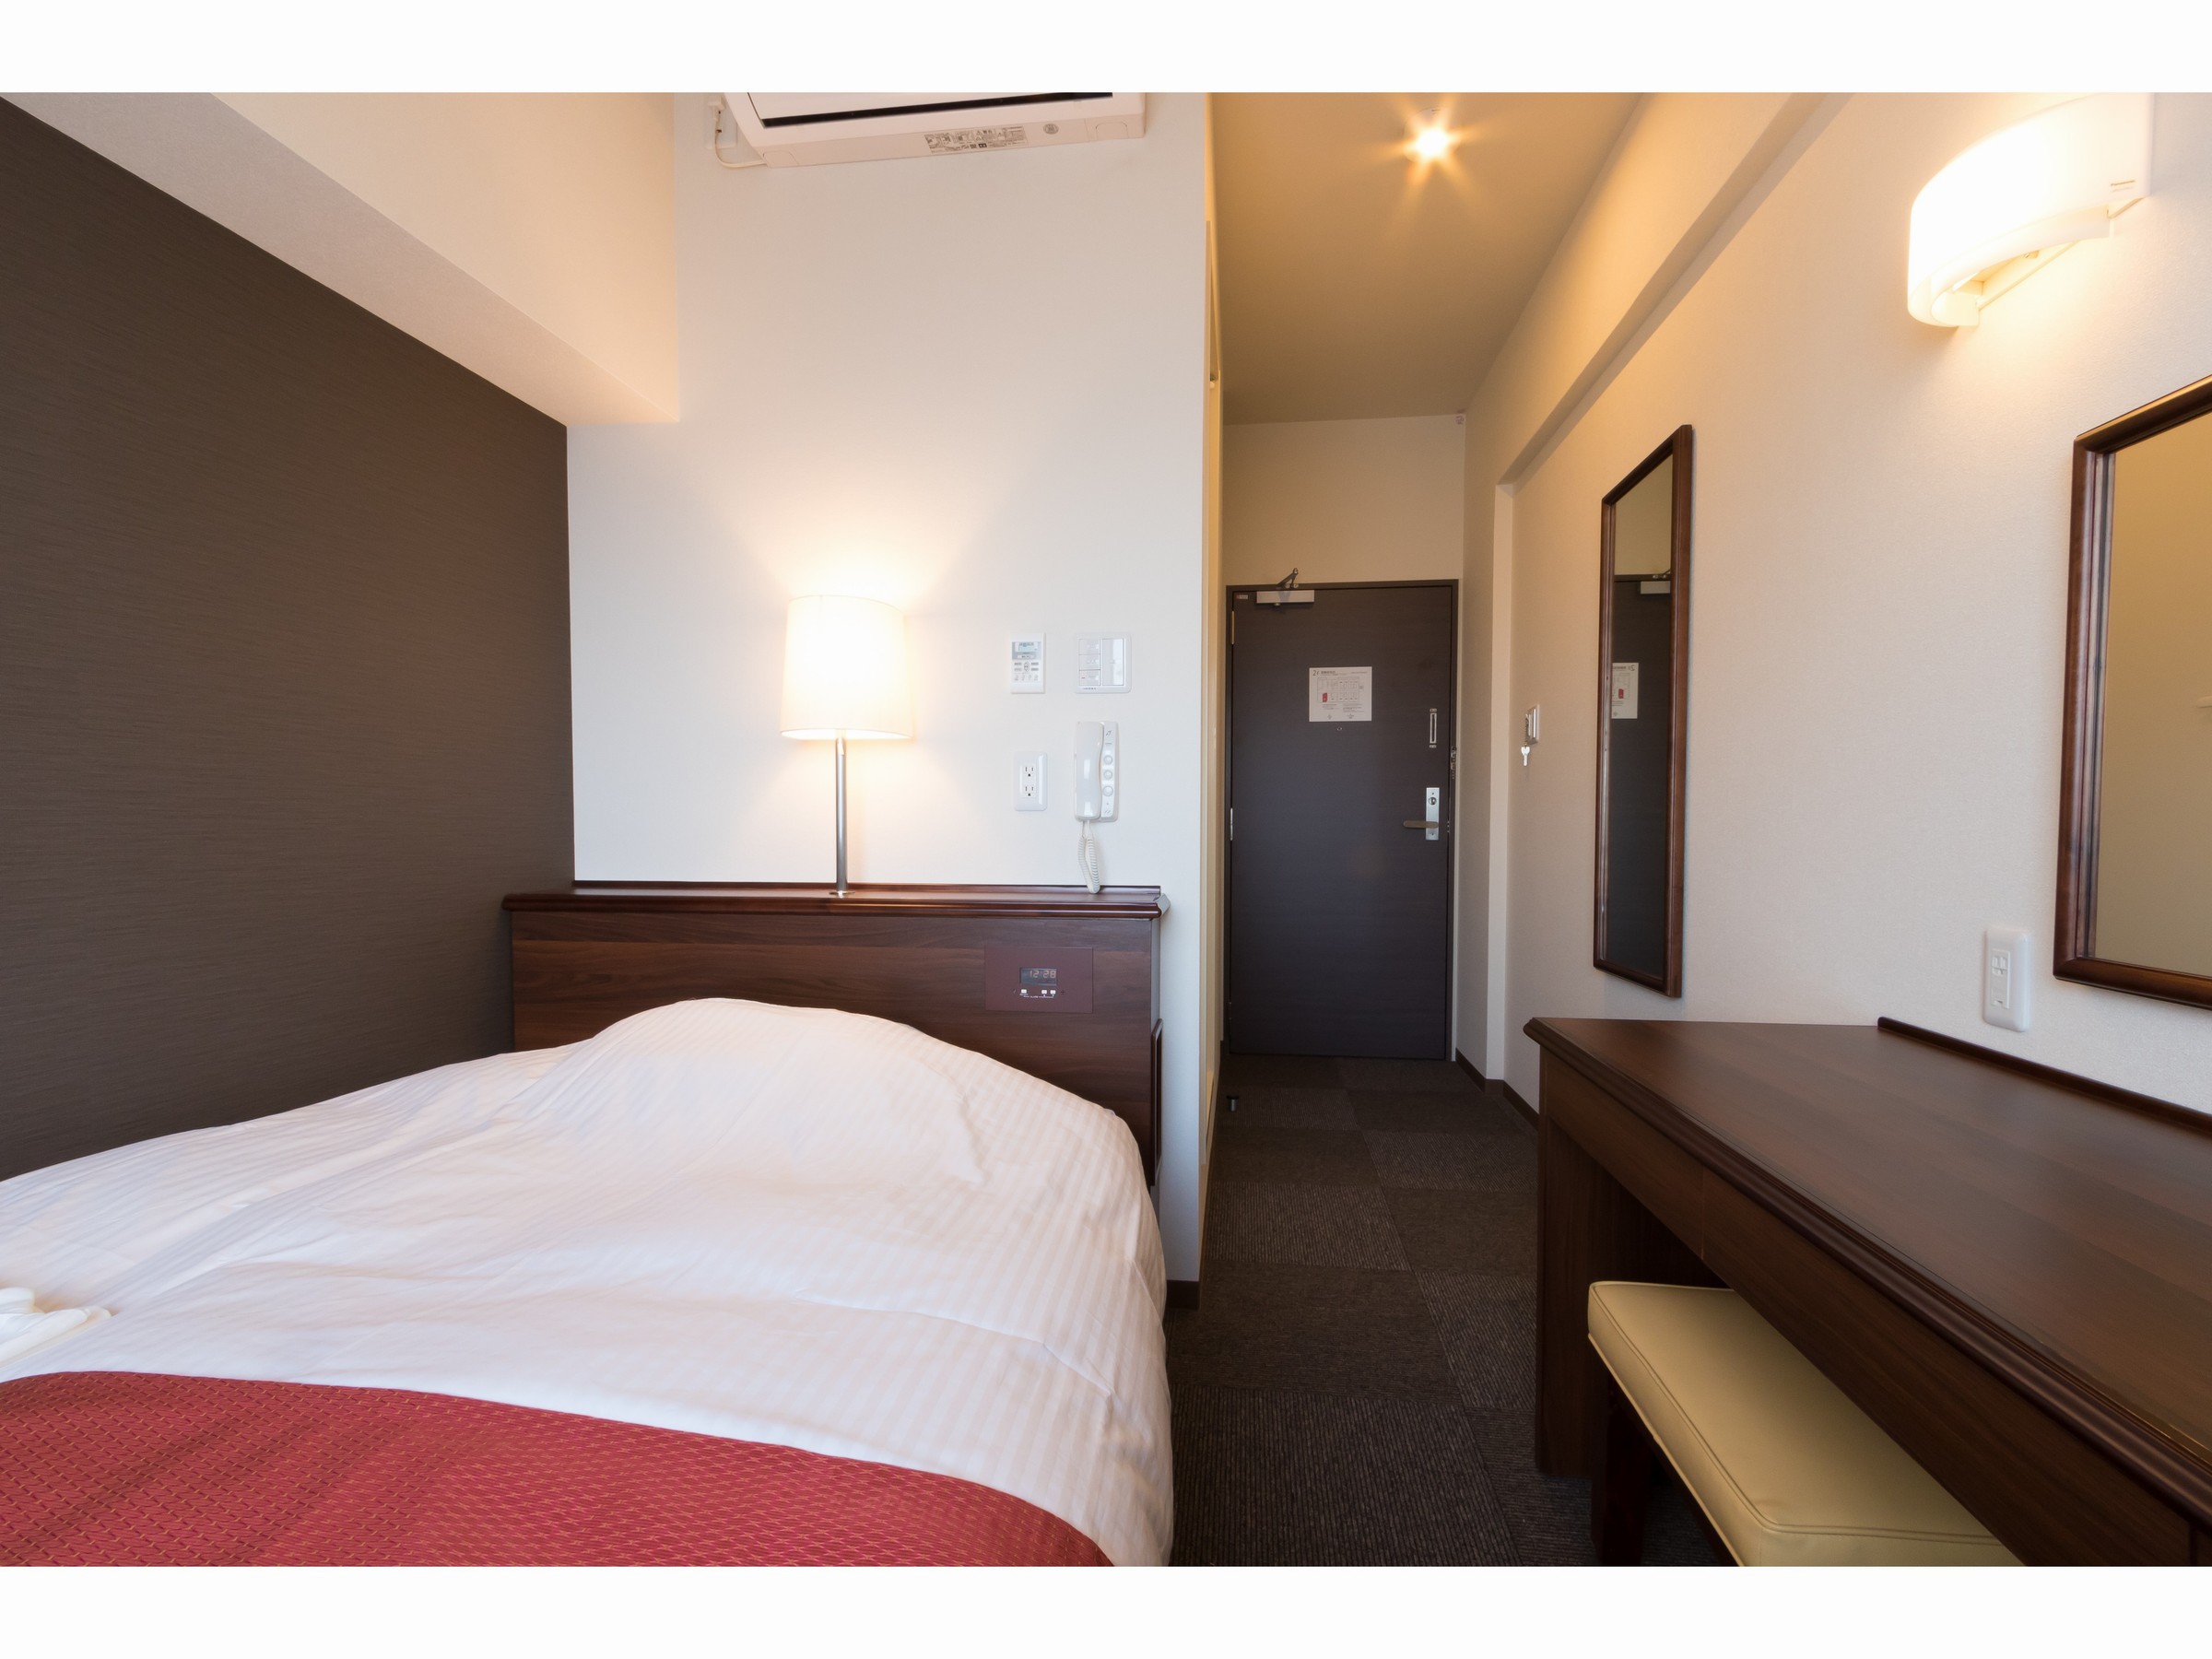 Hotel Topaz Ozai Ekimae Hotel Topaz Ozai Ekimae is perfectly located for both business and leisure guests in Oita. The property has everything you need for a comfortable stay. Free Wi-Fi in all rooms, facilities for disabled